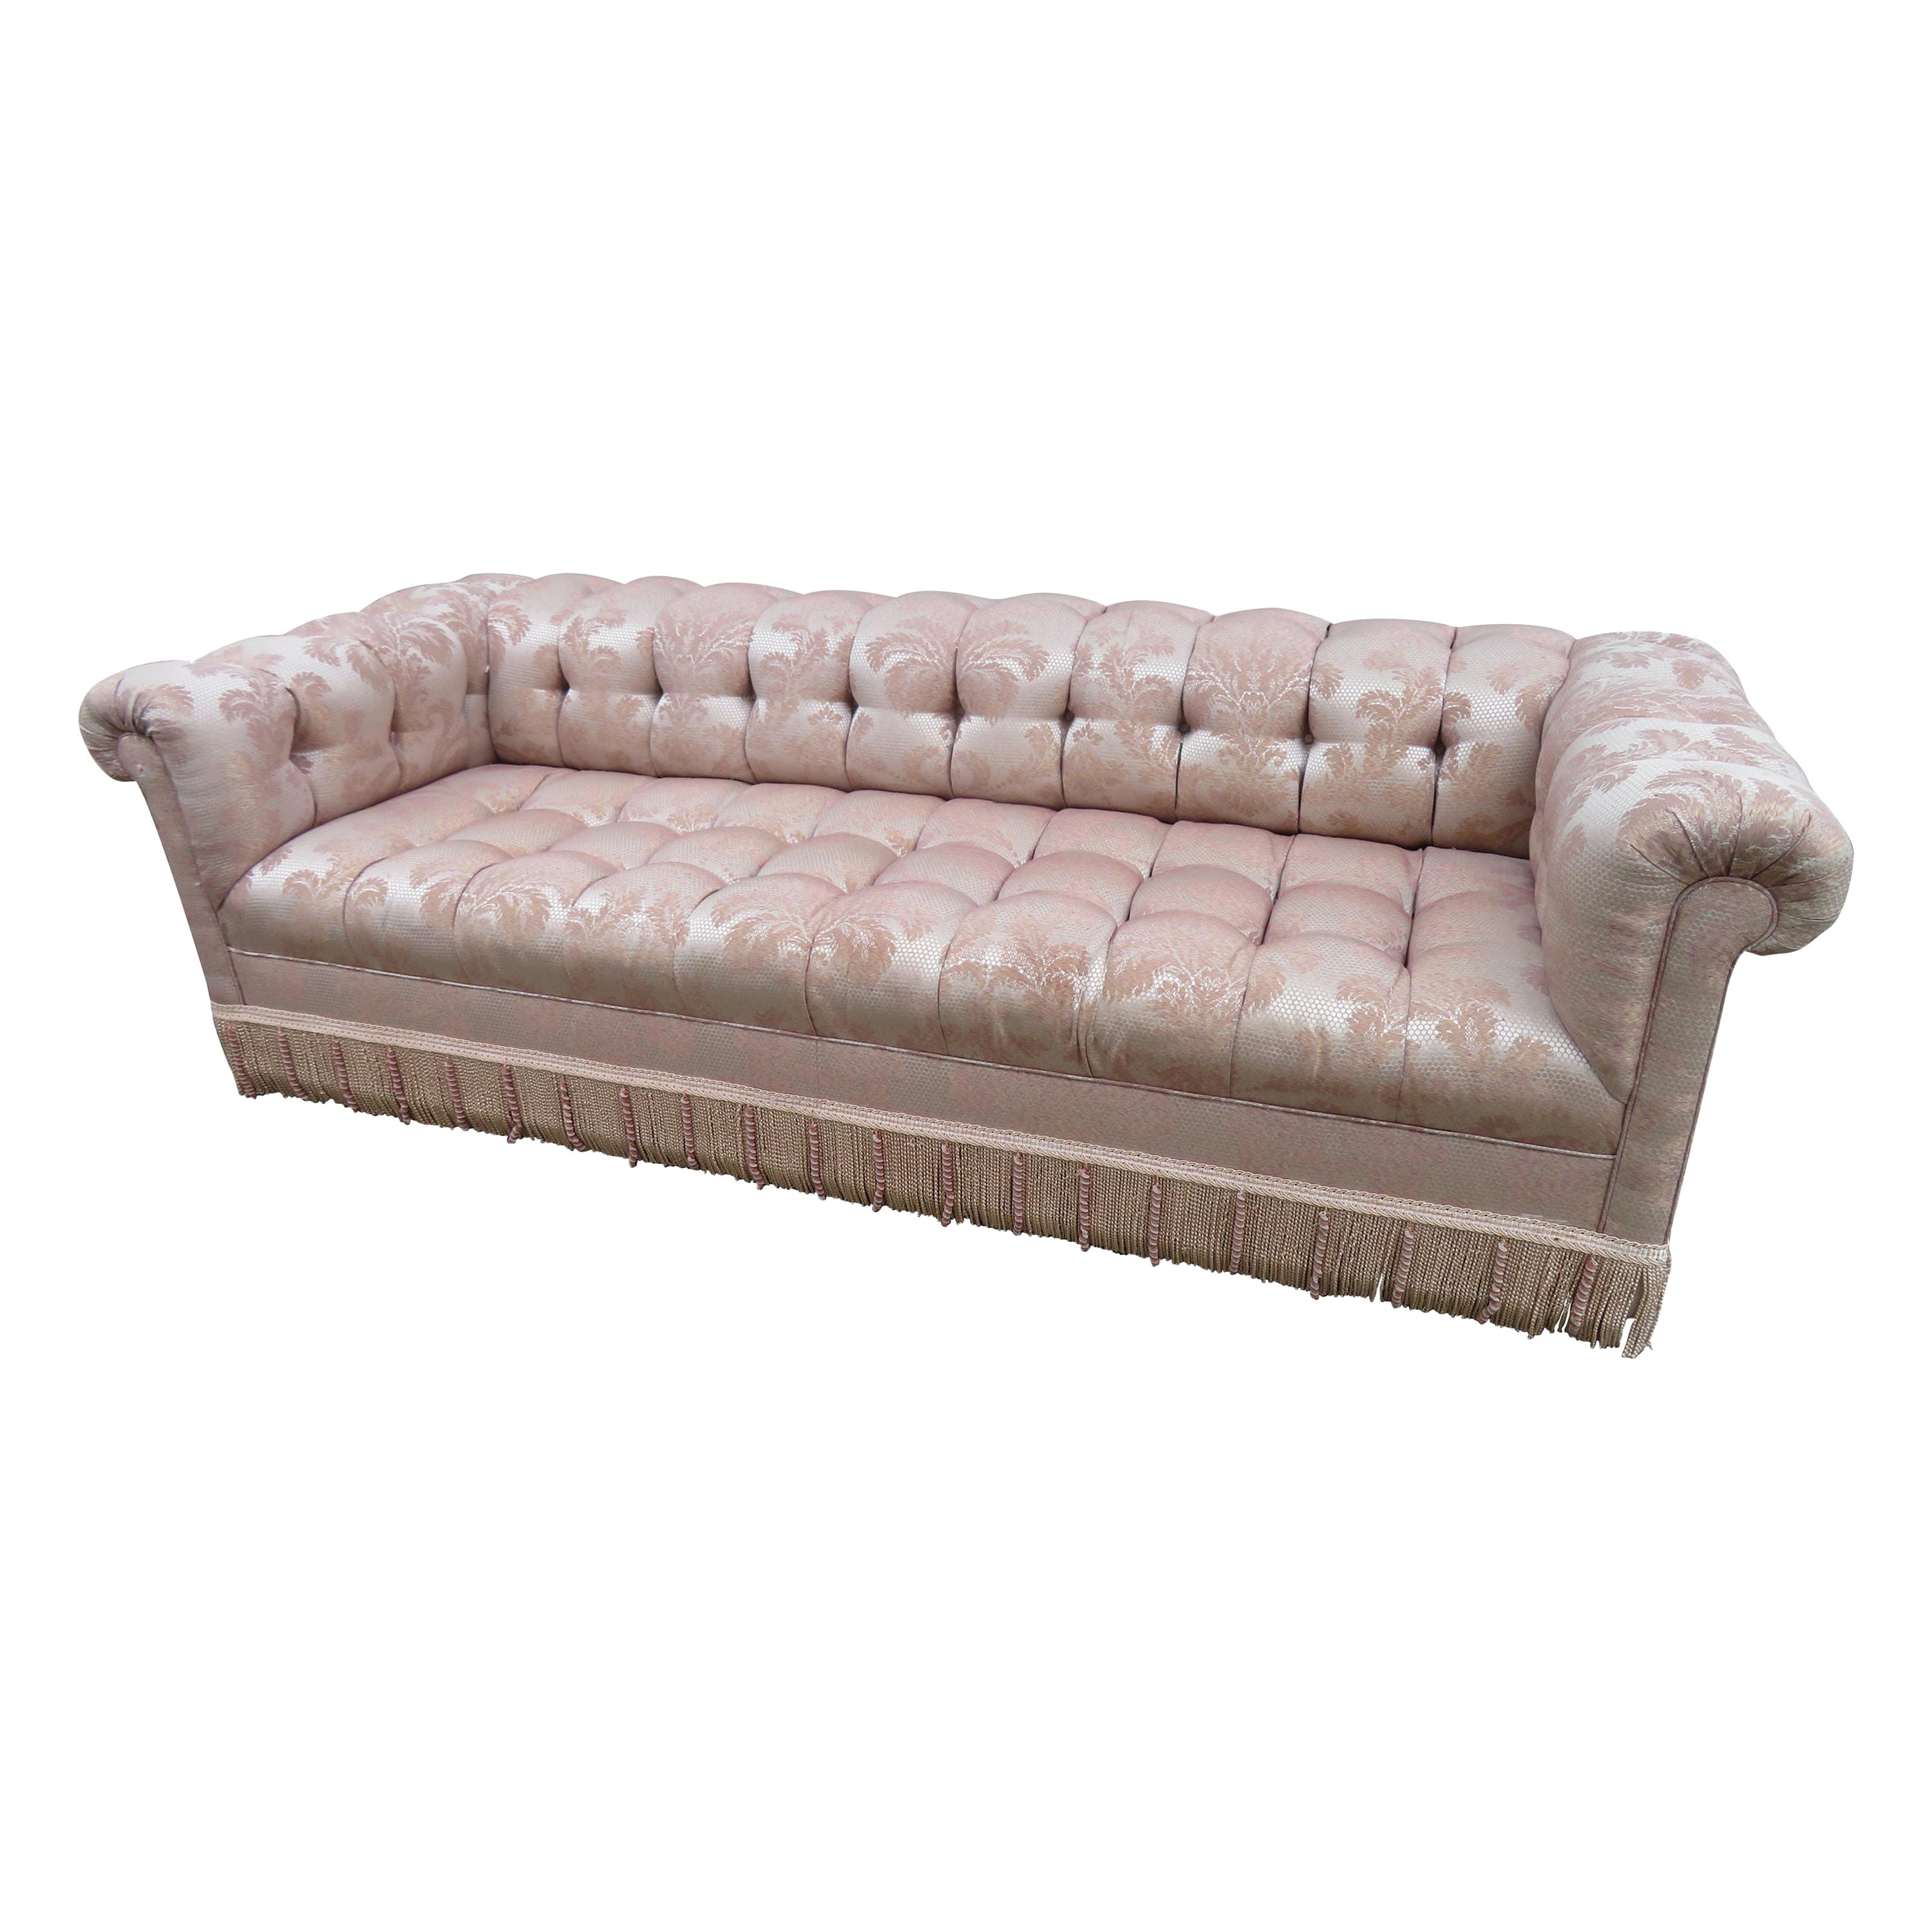 Magnificent Directional Biscuit Tufted Party Sofa Midcentury For Sale